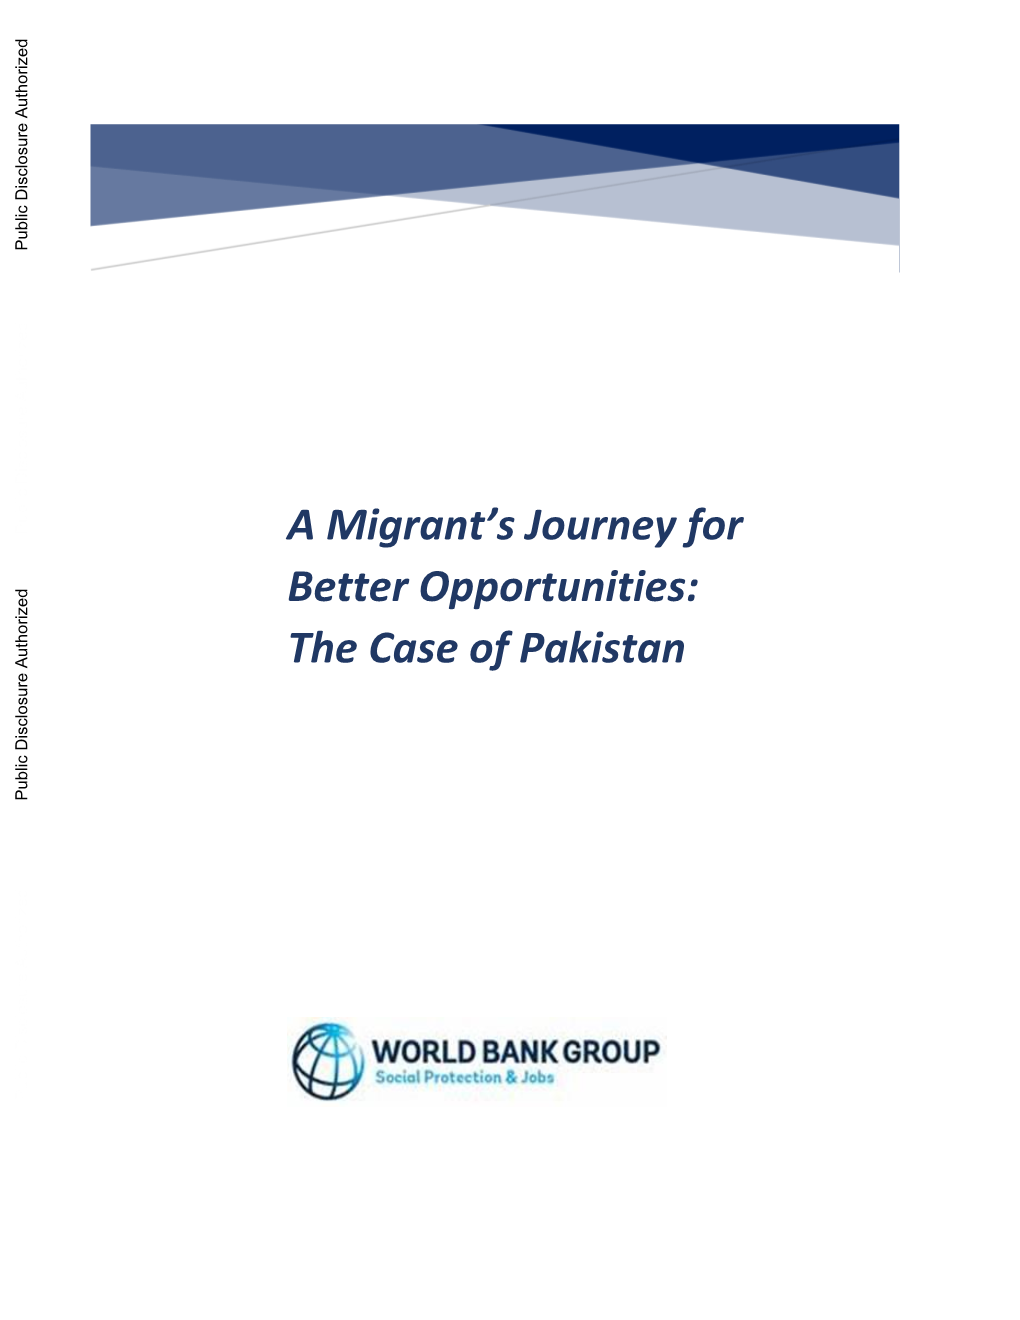 A Migrant's Journey for Better Opportunities: the Case of Pakistan